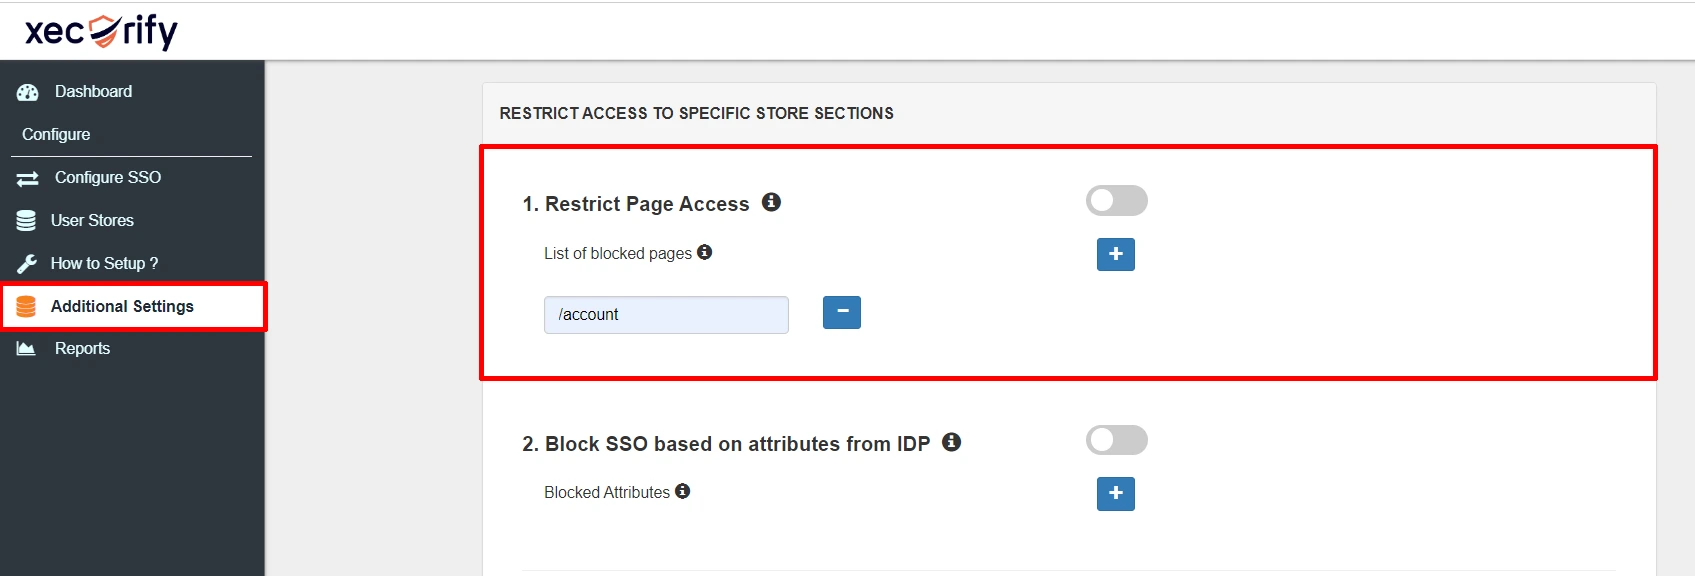 Shopify Single Sign-On (SSO) - Restrict access to certain pages in the shopify store